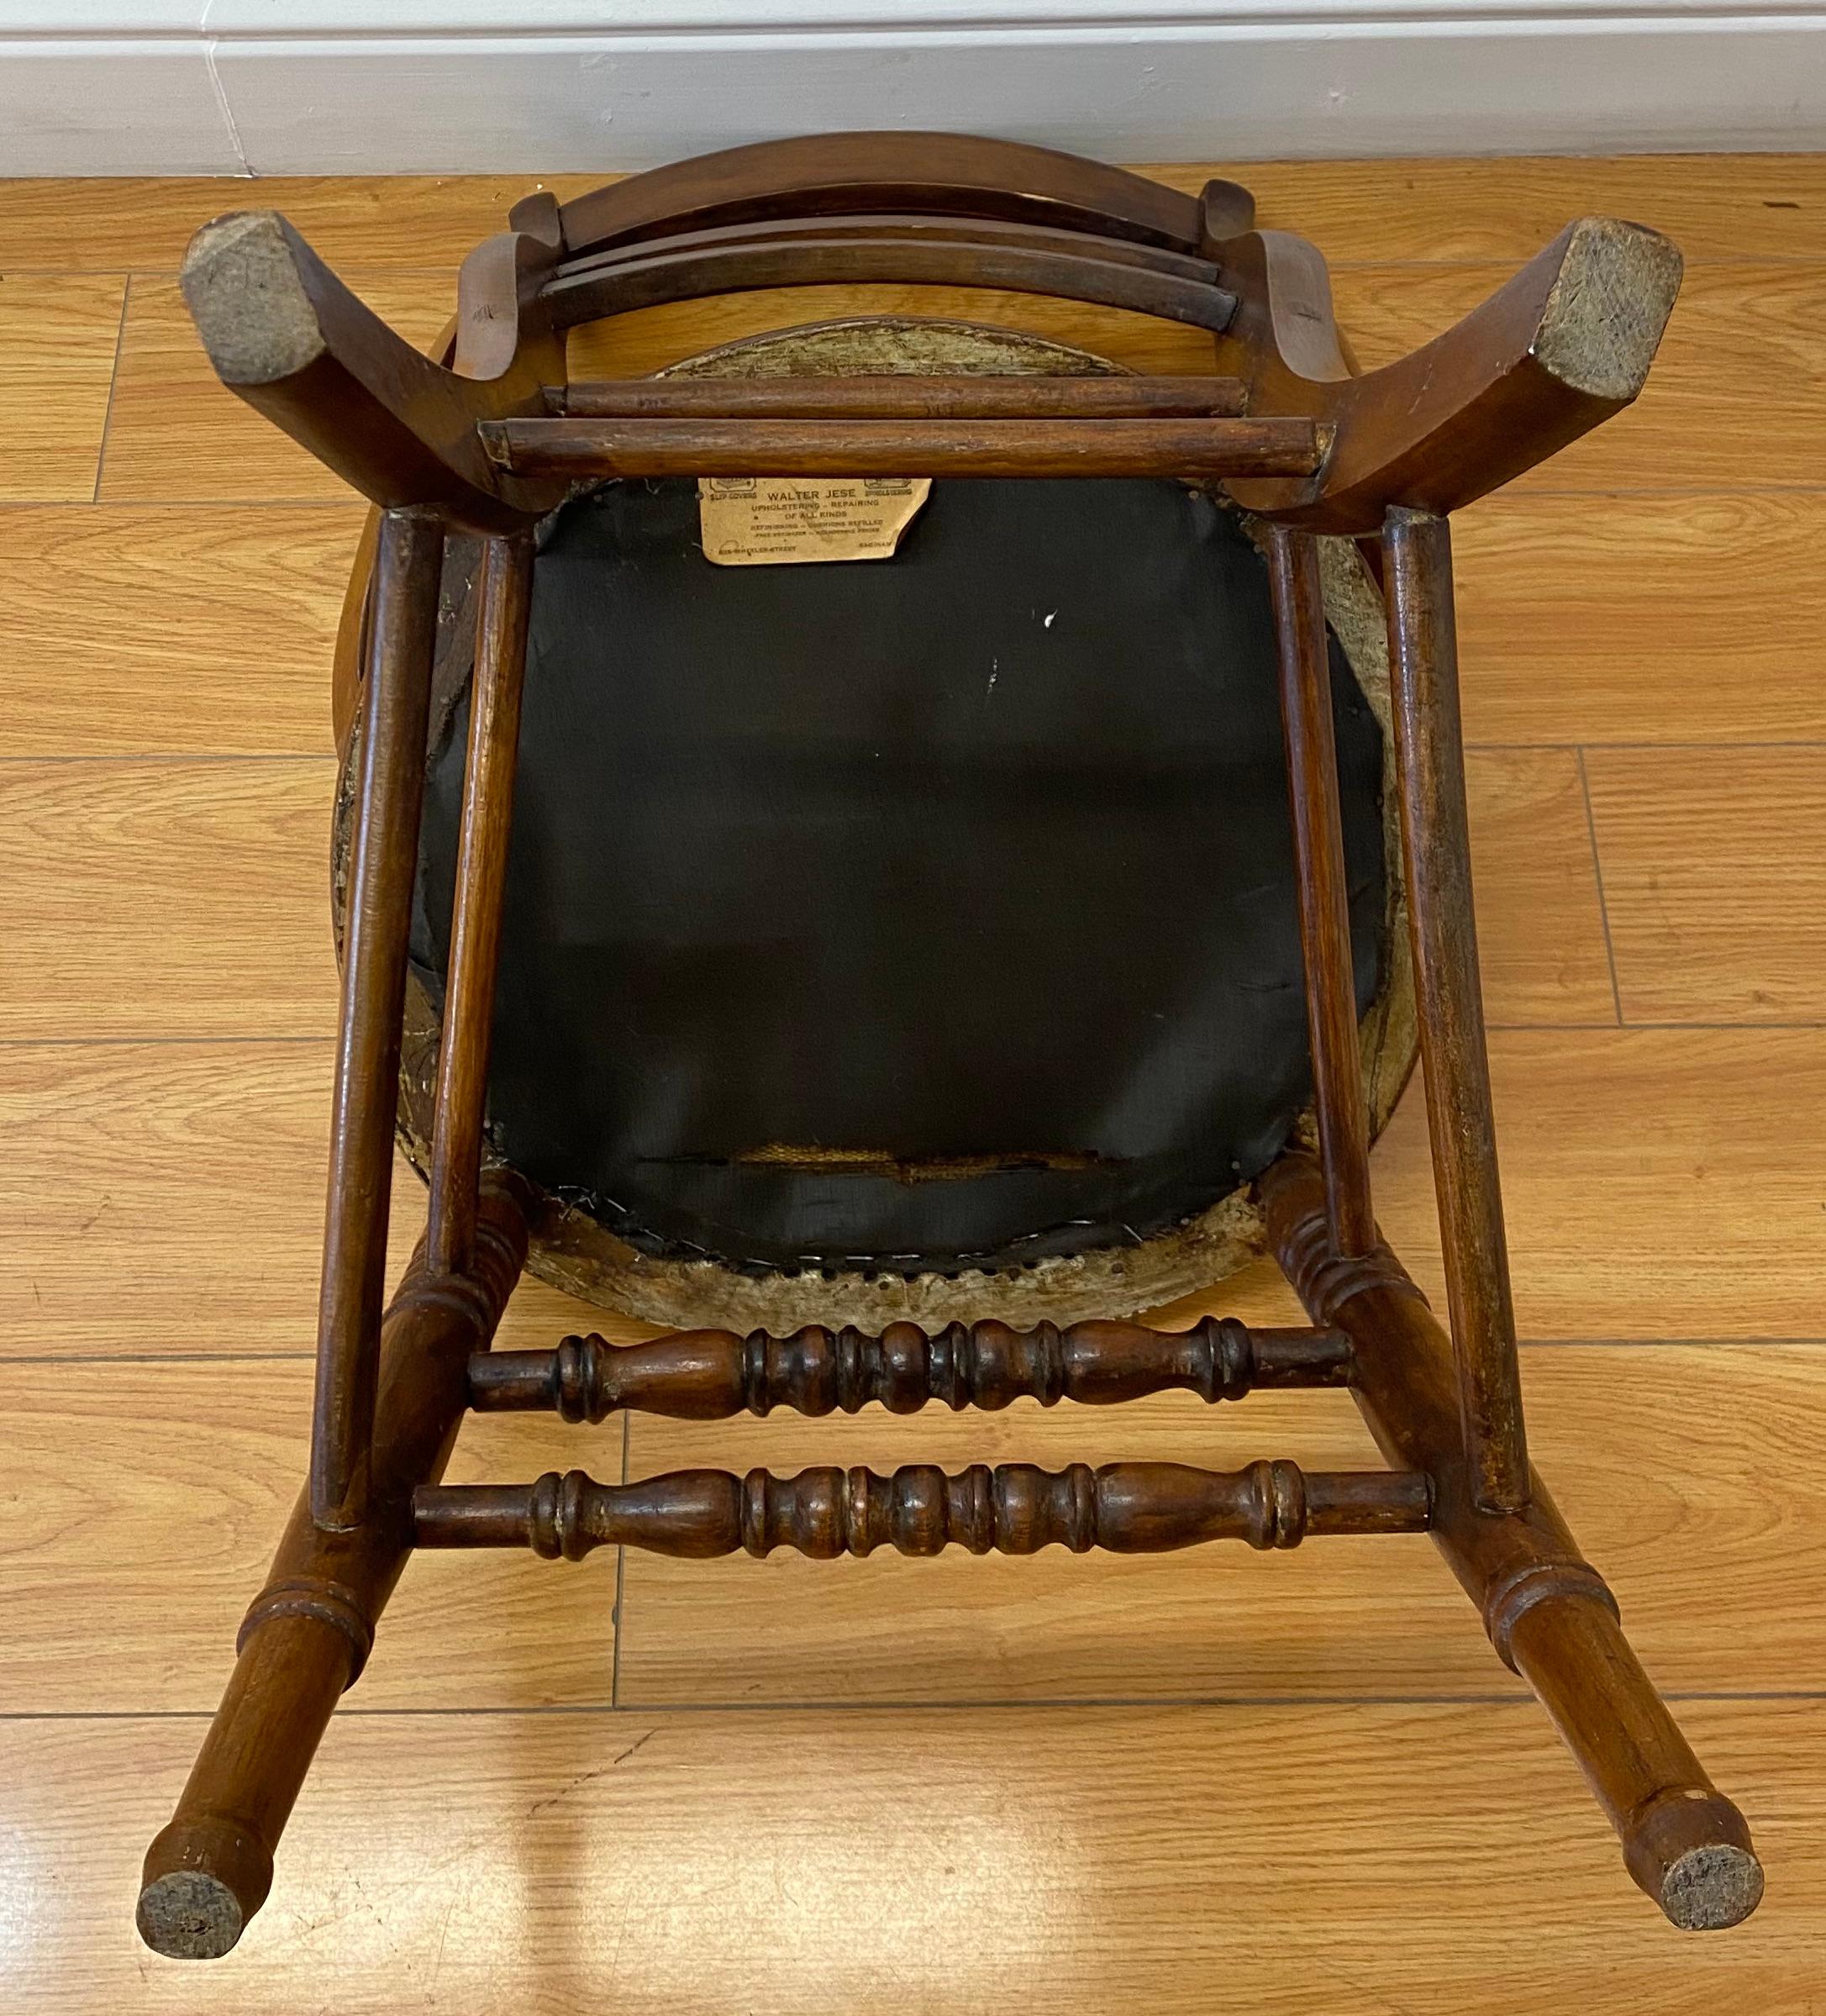 American Colonial Mid 19th Century American Walnut Chair W/ Needlepoint Seat, C.1870